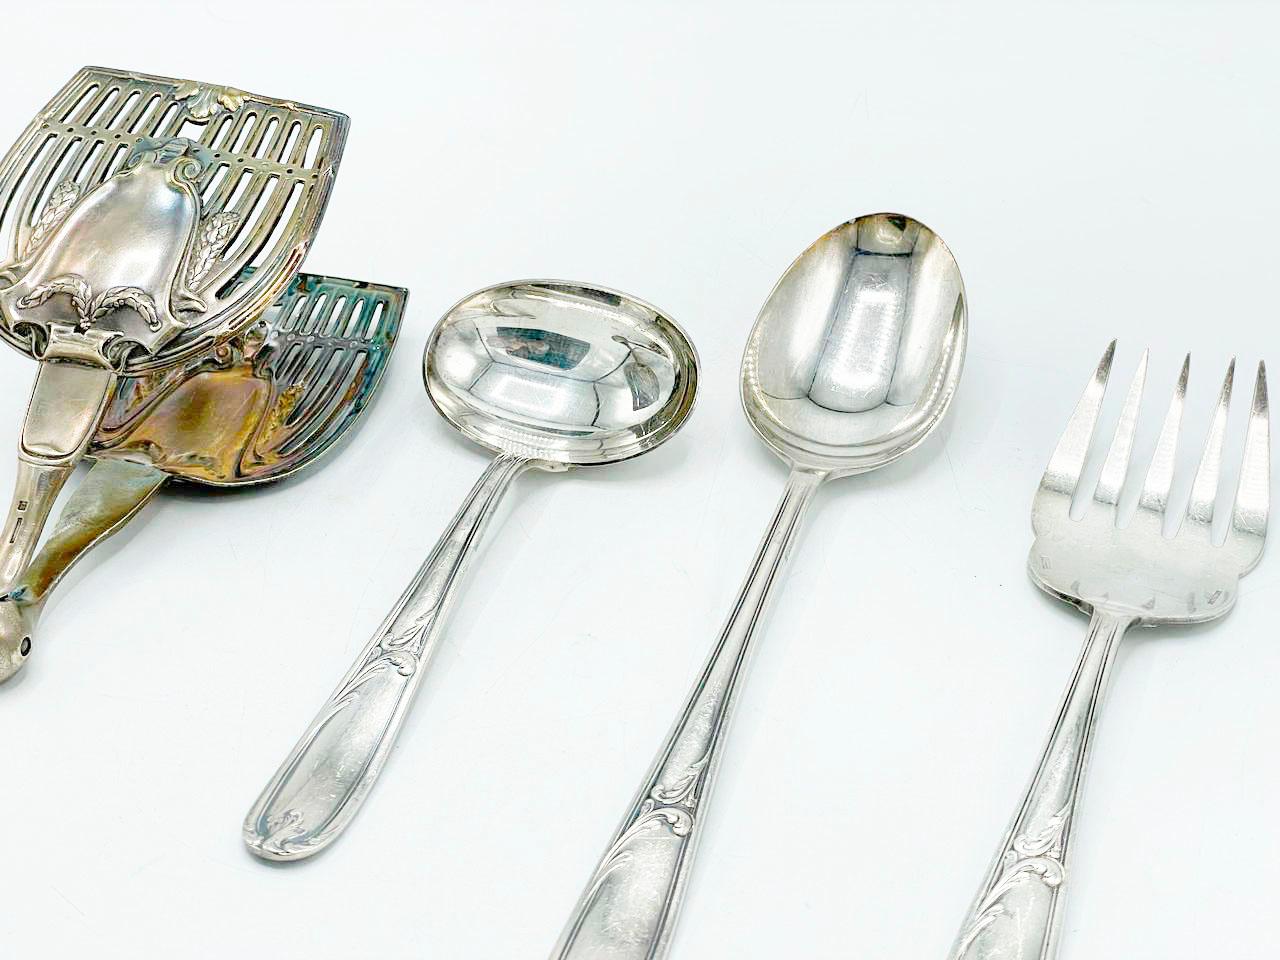 Gorgeous unknown pattern made in Argentina Christofle Silverplate Flatware set 
100 pieces total. This set includes:

12 Dinner Forks - 20 centimeters 
12 Salad Forks - 17,5 centimeters
12 Dinner knives - 24,5 centimeters
12 Salad knives - 19,5